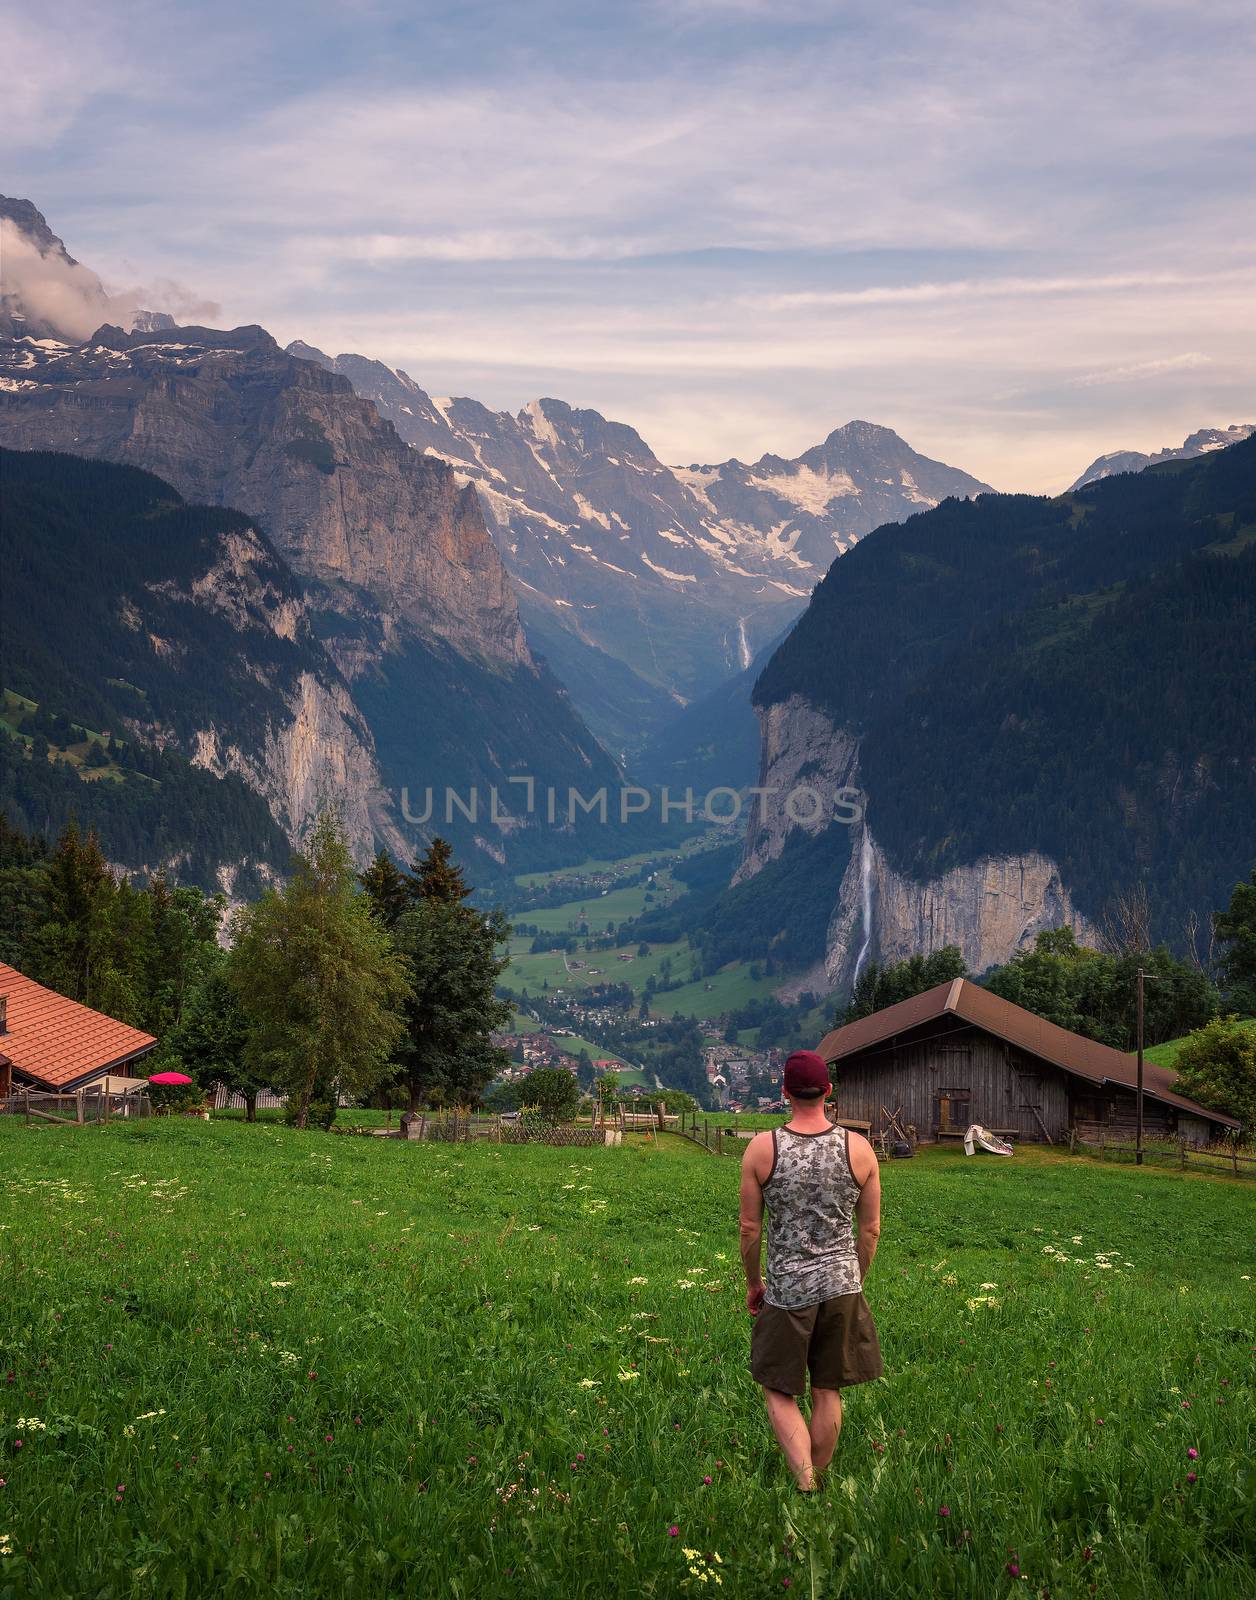 Tourist looks at the Lauterbrunnen valley from the alpine village of Wengen located in the Swiss Alps near Interlaken in the Bernese Oberland of Switzerland.